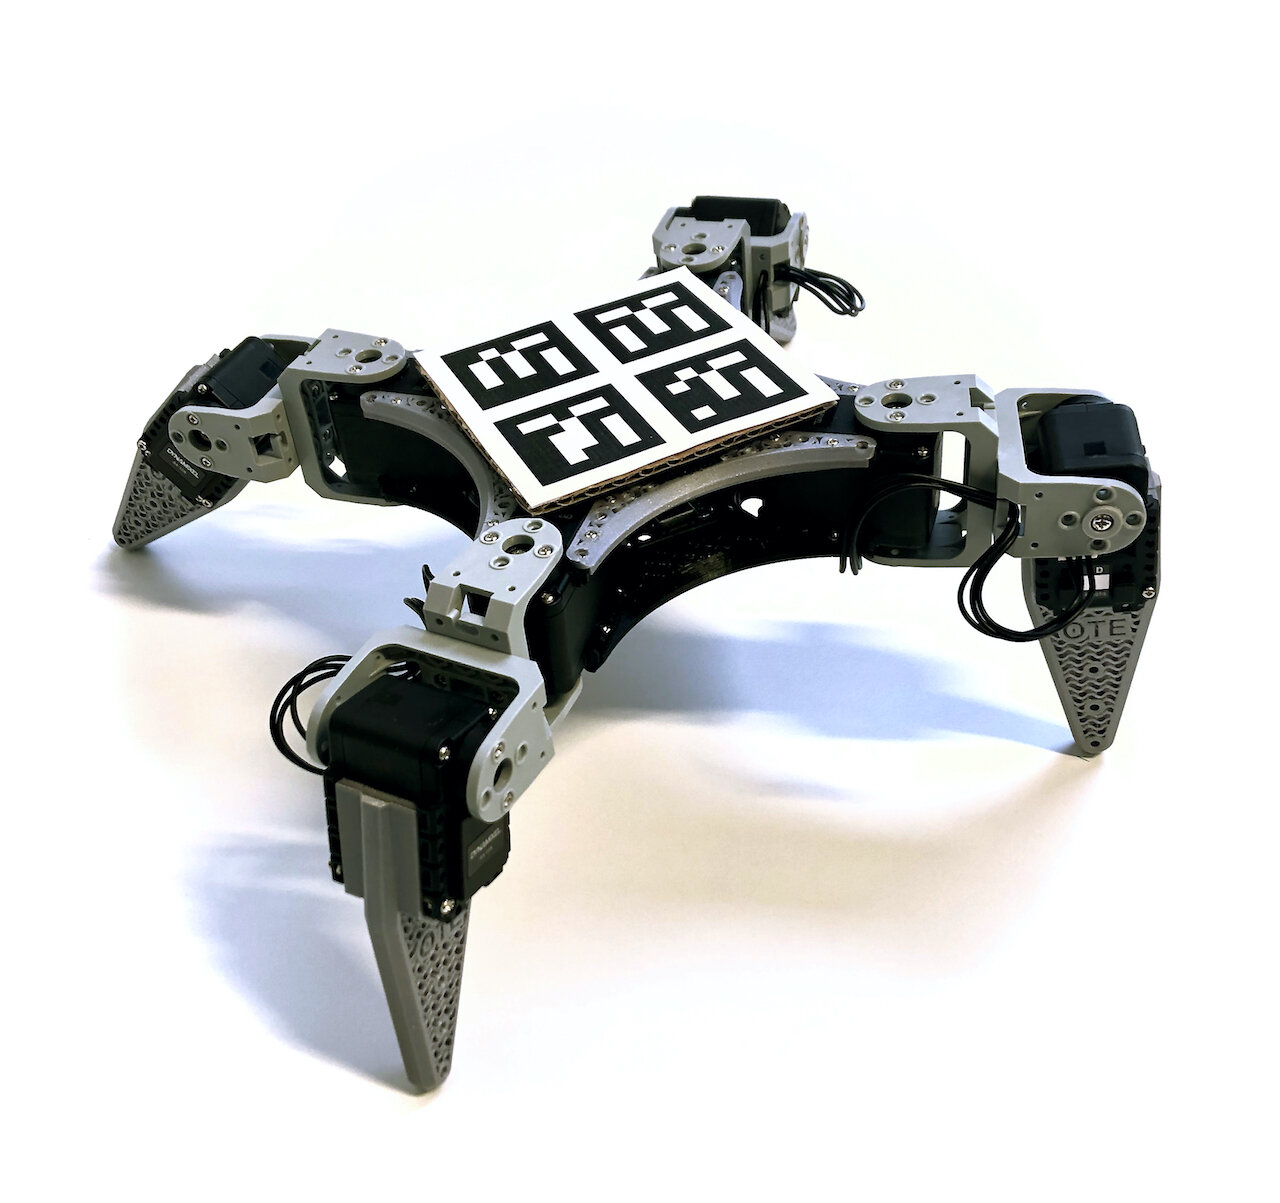 #A low-cost quadruped robot that can learn via reinforcement learning ...